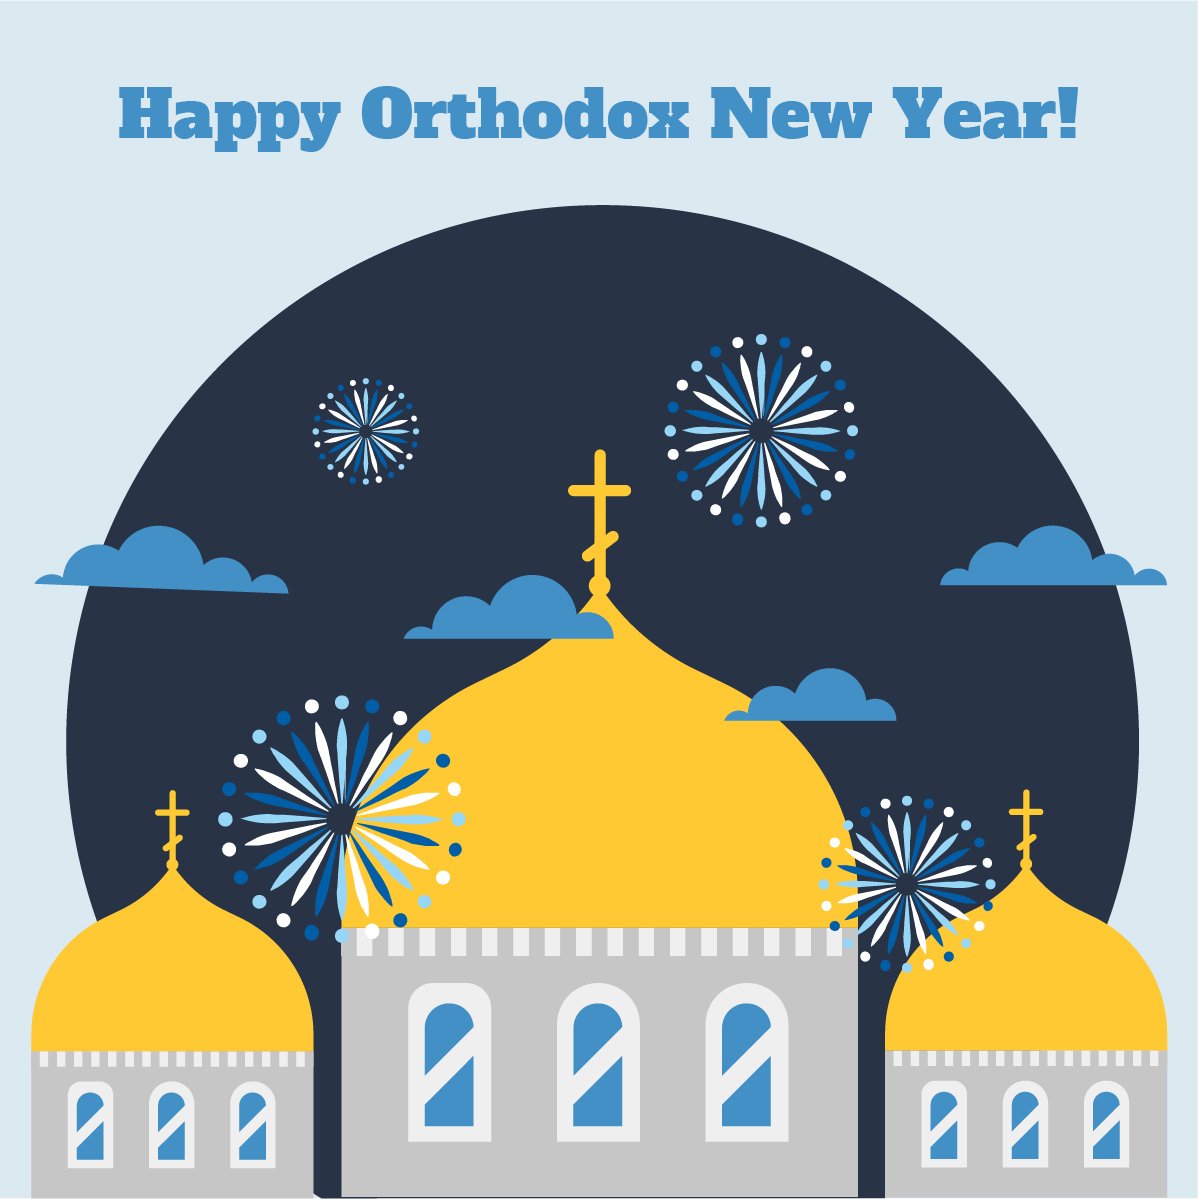 Free Happy Orthodox New Year Vector in Illustrator, PSD, EPS, SVG, JPG, PNG